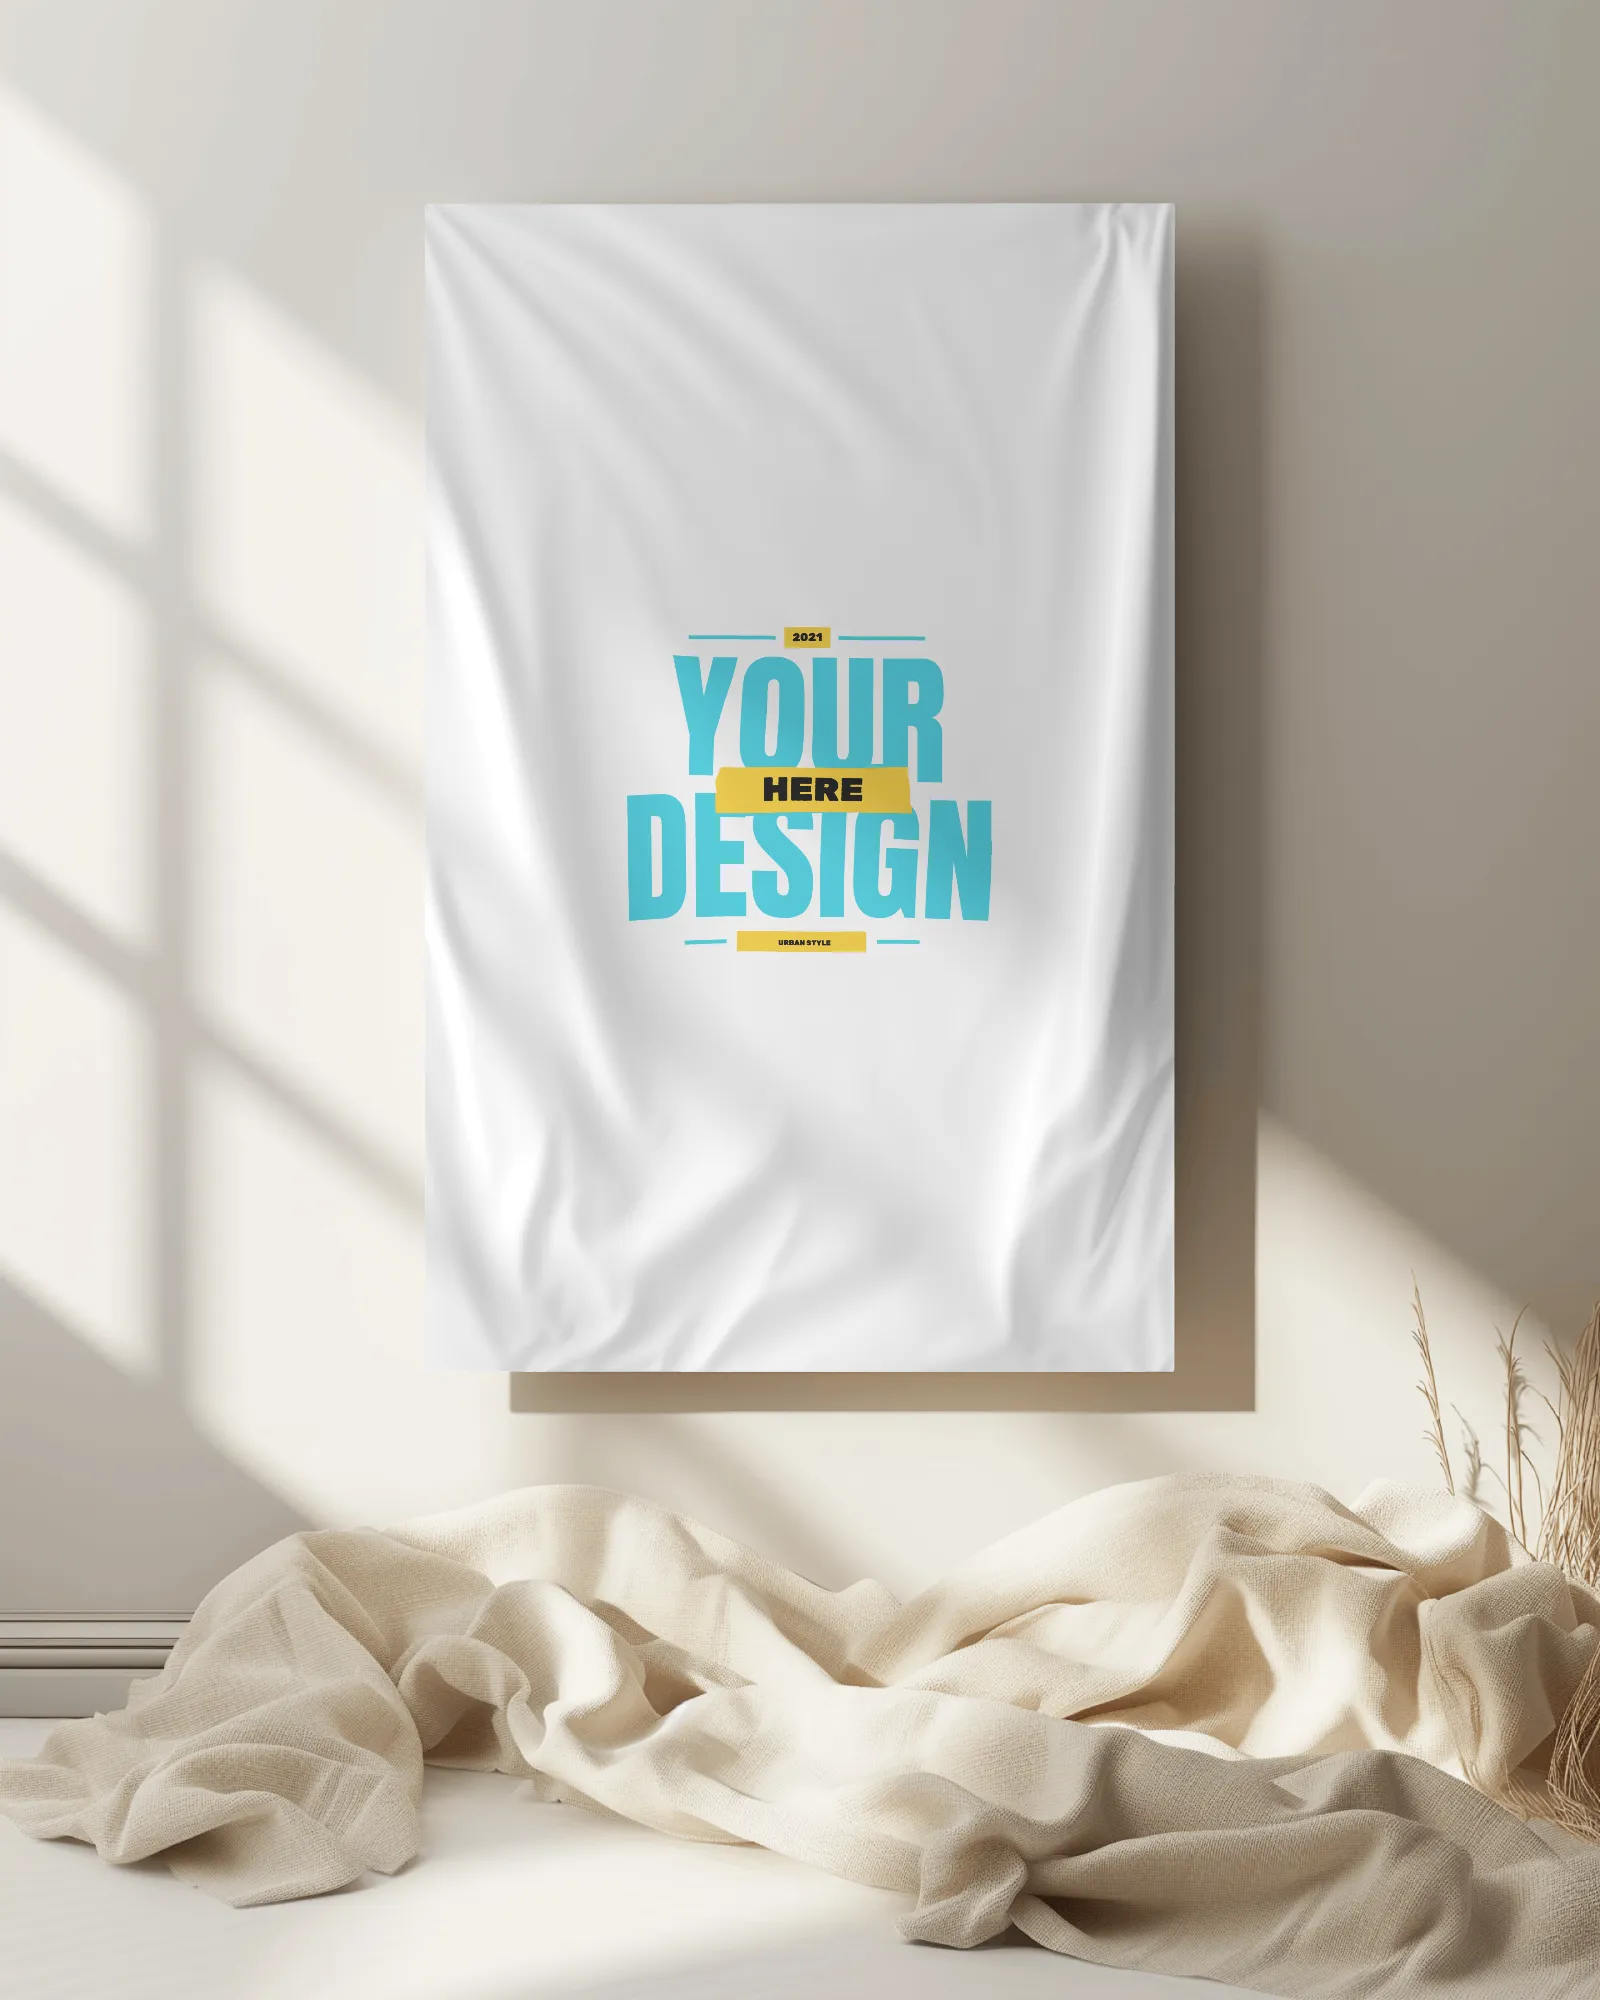 cloth poster mockup in living room with sheet lying on floor